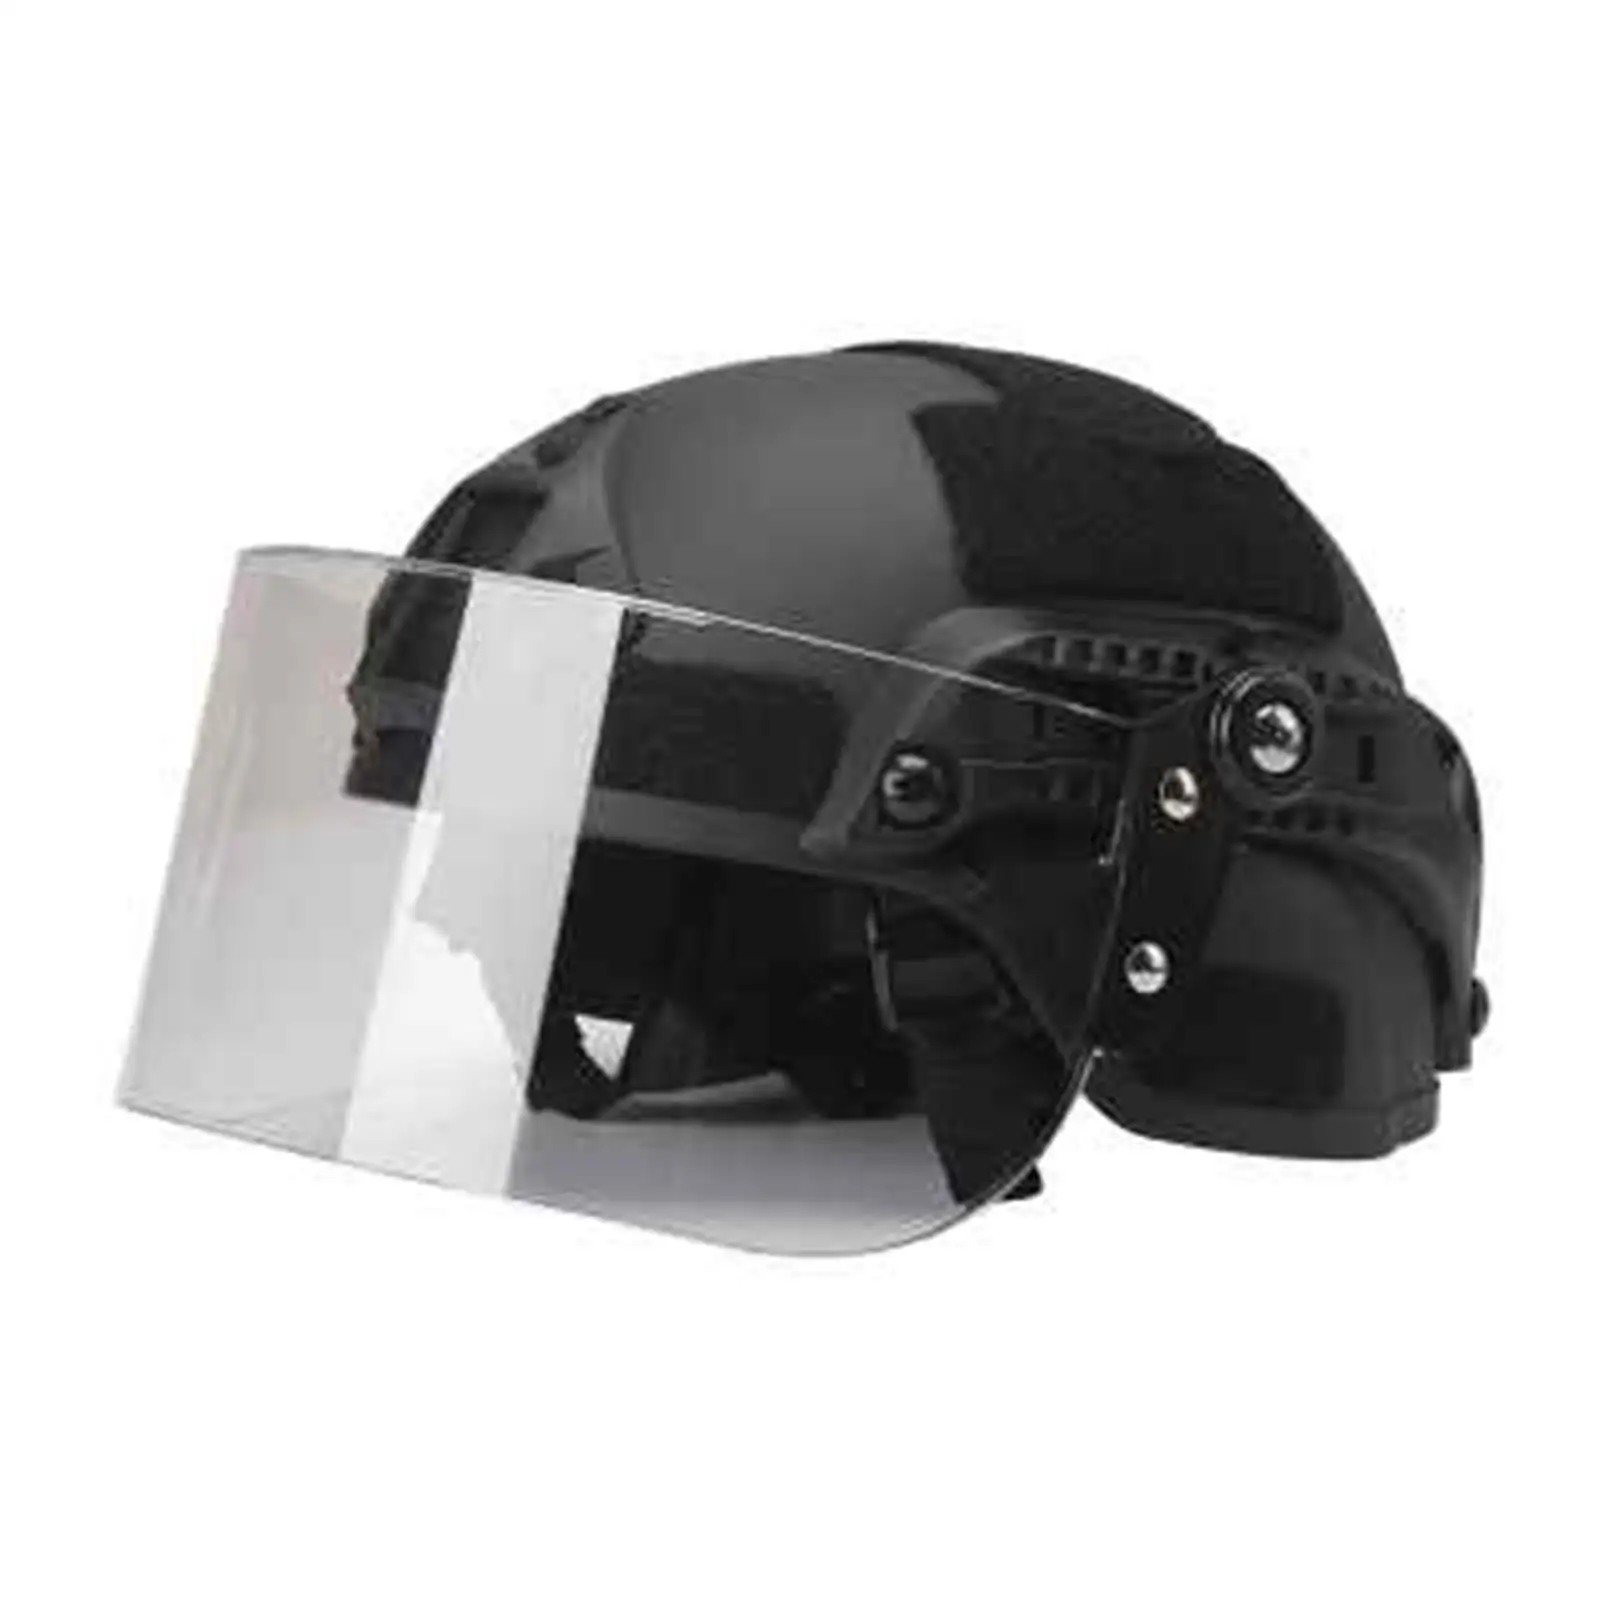 Motorcycle Wind Shield Lens Clear Shield Face Shield for Motocross